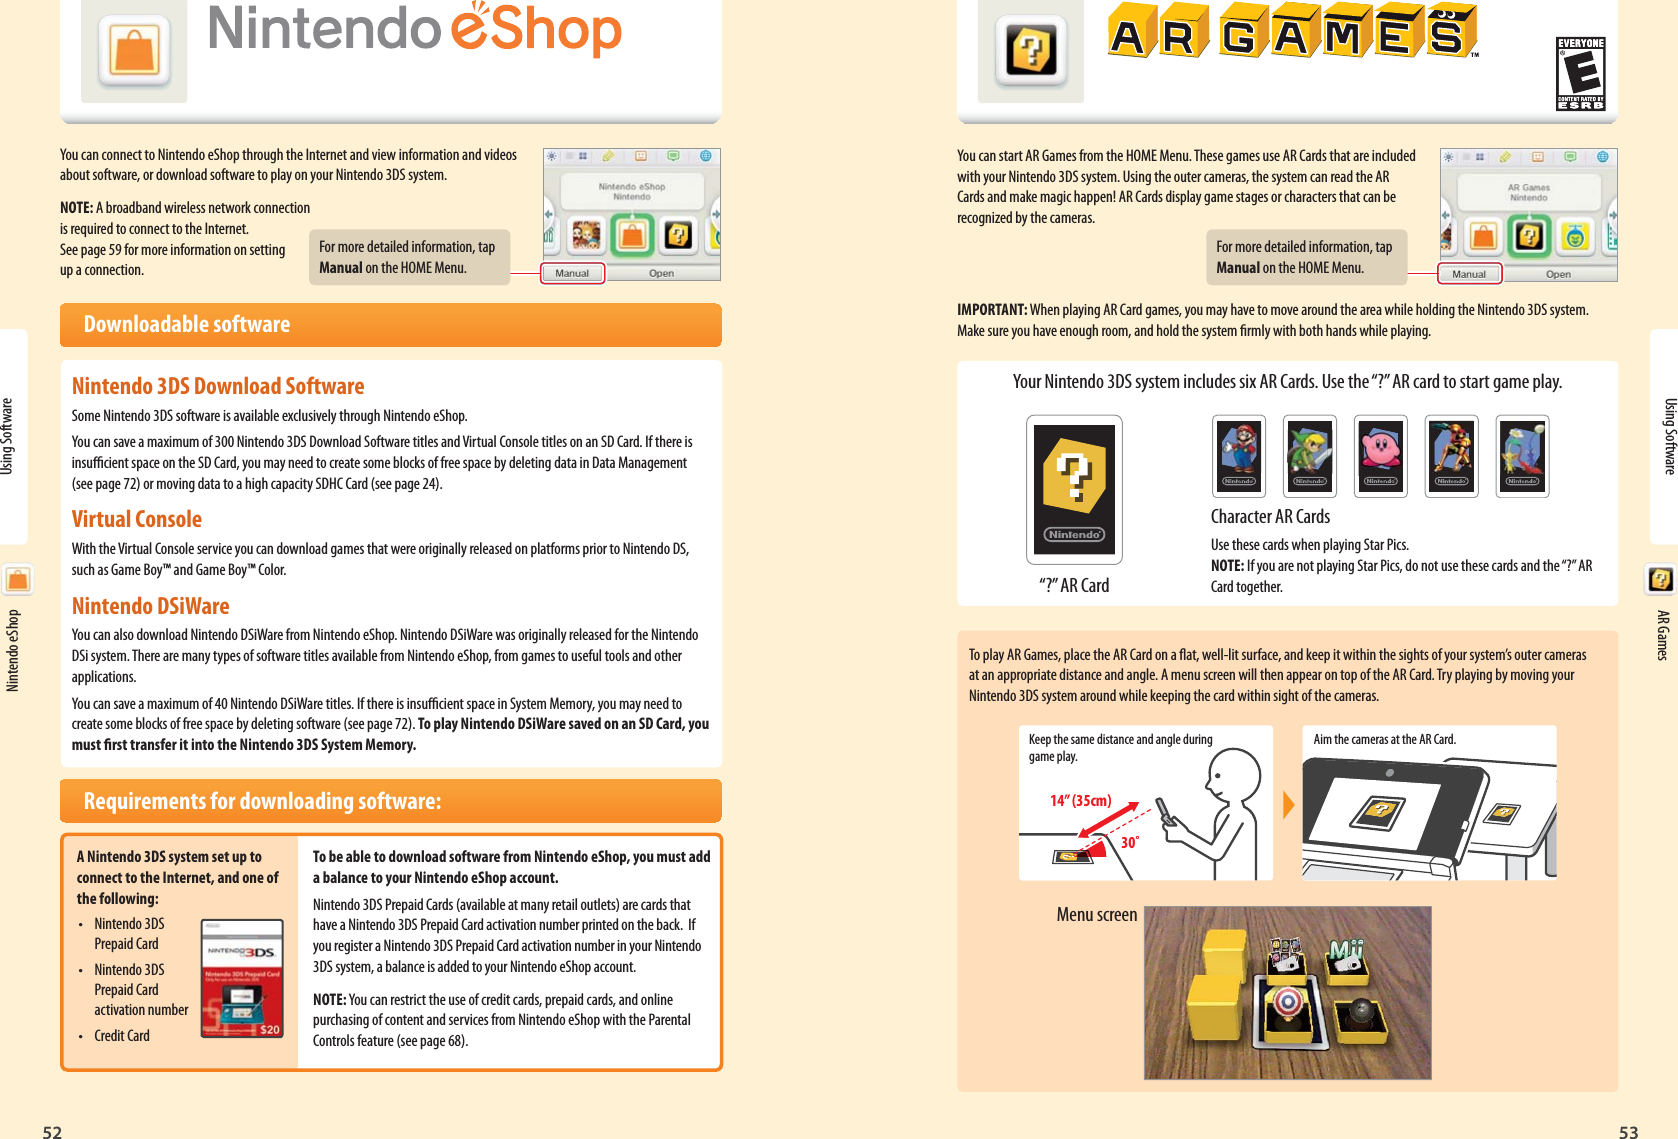 Nintendo eShop52Using Software53AR GamesFor more detailed information, tap Manual on the HOME Menu.“?” AR CardFor more detailed information, tap Manual on the HOME Menu.Keep the same distance and angle during game play.Aim the cameras at the AR Card.14” (35cm)30˚Menu screenUsing Software Nintendo eShop AR GamesYou can connect to Nintendo eShop through the Internet and view information and videos about software, or download software to play on your Nintendo 3DS system.NOTE: A broadband wireless network connection is required to connect to the Internet. See page 59 for more information on setting up a connection. Downloadable softwareNintendo 3DS Download SoftwareSome Nintendo 3DS software is available exclusively through Nintendo eShop.You can save a maximum of 300 Nintendo 3DS Download Software titles and Virtual Console titles on an SD Card. If there is insucient space on the SD Card, you may need to create some blocks of free space by deleting data in Data Management (see page 72) or moving data to a high capacity SDHC Card (see page 24).Virtual ConsoleWith the Virtual Console service you can download games that were originally released on platforms prior to Nintendo DS, such as Game Boy™ and Game Boy™ Color.Nintendo DSiWare You can also download Nintendo DSiWare from Nintendo eShop. Nintendo DSiWare was originally released for the Nintendo DSi system. There are many types of software titles available from Nintendo eShop, from games to useful tools and other applications.You can save a maximum of 40 Nintendo DSiWare titles. If there is insucient space in System Memory, you may need to create some blocks of free space by deleting software (see page 72). To play Nintendo DSiWare saved on an SD Card, you must rst transfer it into the Nintendo 3DS System Memory.  Requirements for downloading software:A Nintendo 3DS system set up to connect to the Internet, and one of the following:• Nintendo 3DS Prepaid Card• Nintendo 3DS Prepaid Card activation number• Credit CardTo be able to download software from Nintendo eShop, you must add a balance to your Nintendo eShop account.Nintendo 3DS Prepaid Cards (available at many retail outlets) are cards that have a Nintendo 3DS Prepaid Card activation number printed on the back.  If you register a Nintendo 3DS Prepaid Card activation number in your Nintendo 3DS system, a balance is added to your Nintendo eShop account.NOTE: You can restrict the use of credit cards, prepaid cards, and online purchasing of content and services from Nintendo eShop with the Parental Controls feature (see page 68).You can start AR Games from the HOME Menu. These games use AR Cards that are included with your Nintendo 3DS system. Using the outer cameras, the system can read the AR Cards and make magic happen! AR Cards display game stages or characters that can be recognized by the cameras.IMPORTANT: When playing AR Card games, you may have to move around the area while holding the Nintendo 3DS system. Make sure you have enough room, and hold the system rmly with both hands while playing.Your Nintendo 3DS system includes six AR Cards. Use the “?” AR card to start game play.Character AR CardsUse these cards when playing Star Pics.NOTE: If you are not playing Star Pics, do not use these cards and the “?” AR Card together.To play AR Games, place the AR Card on a at, well-lit surface, and keep it within the sights of your system’s outer cameras at an appropriate distance and angle. A menu screen will then appear on top of the AR Card. Try playing by moving your Nintendo 3DS system around while keeping the card within sight of the cameras.